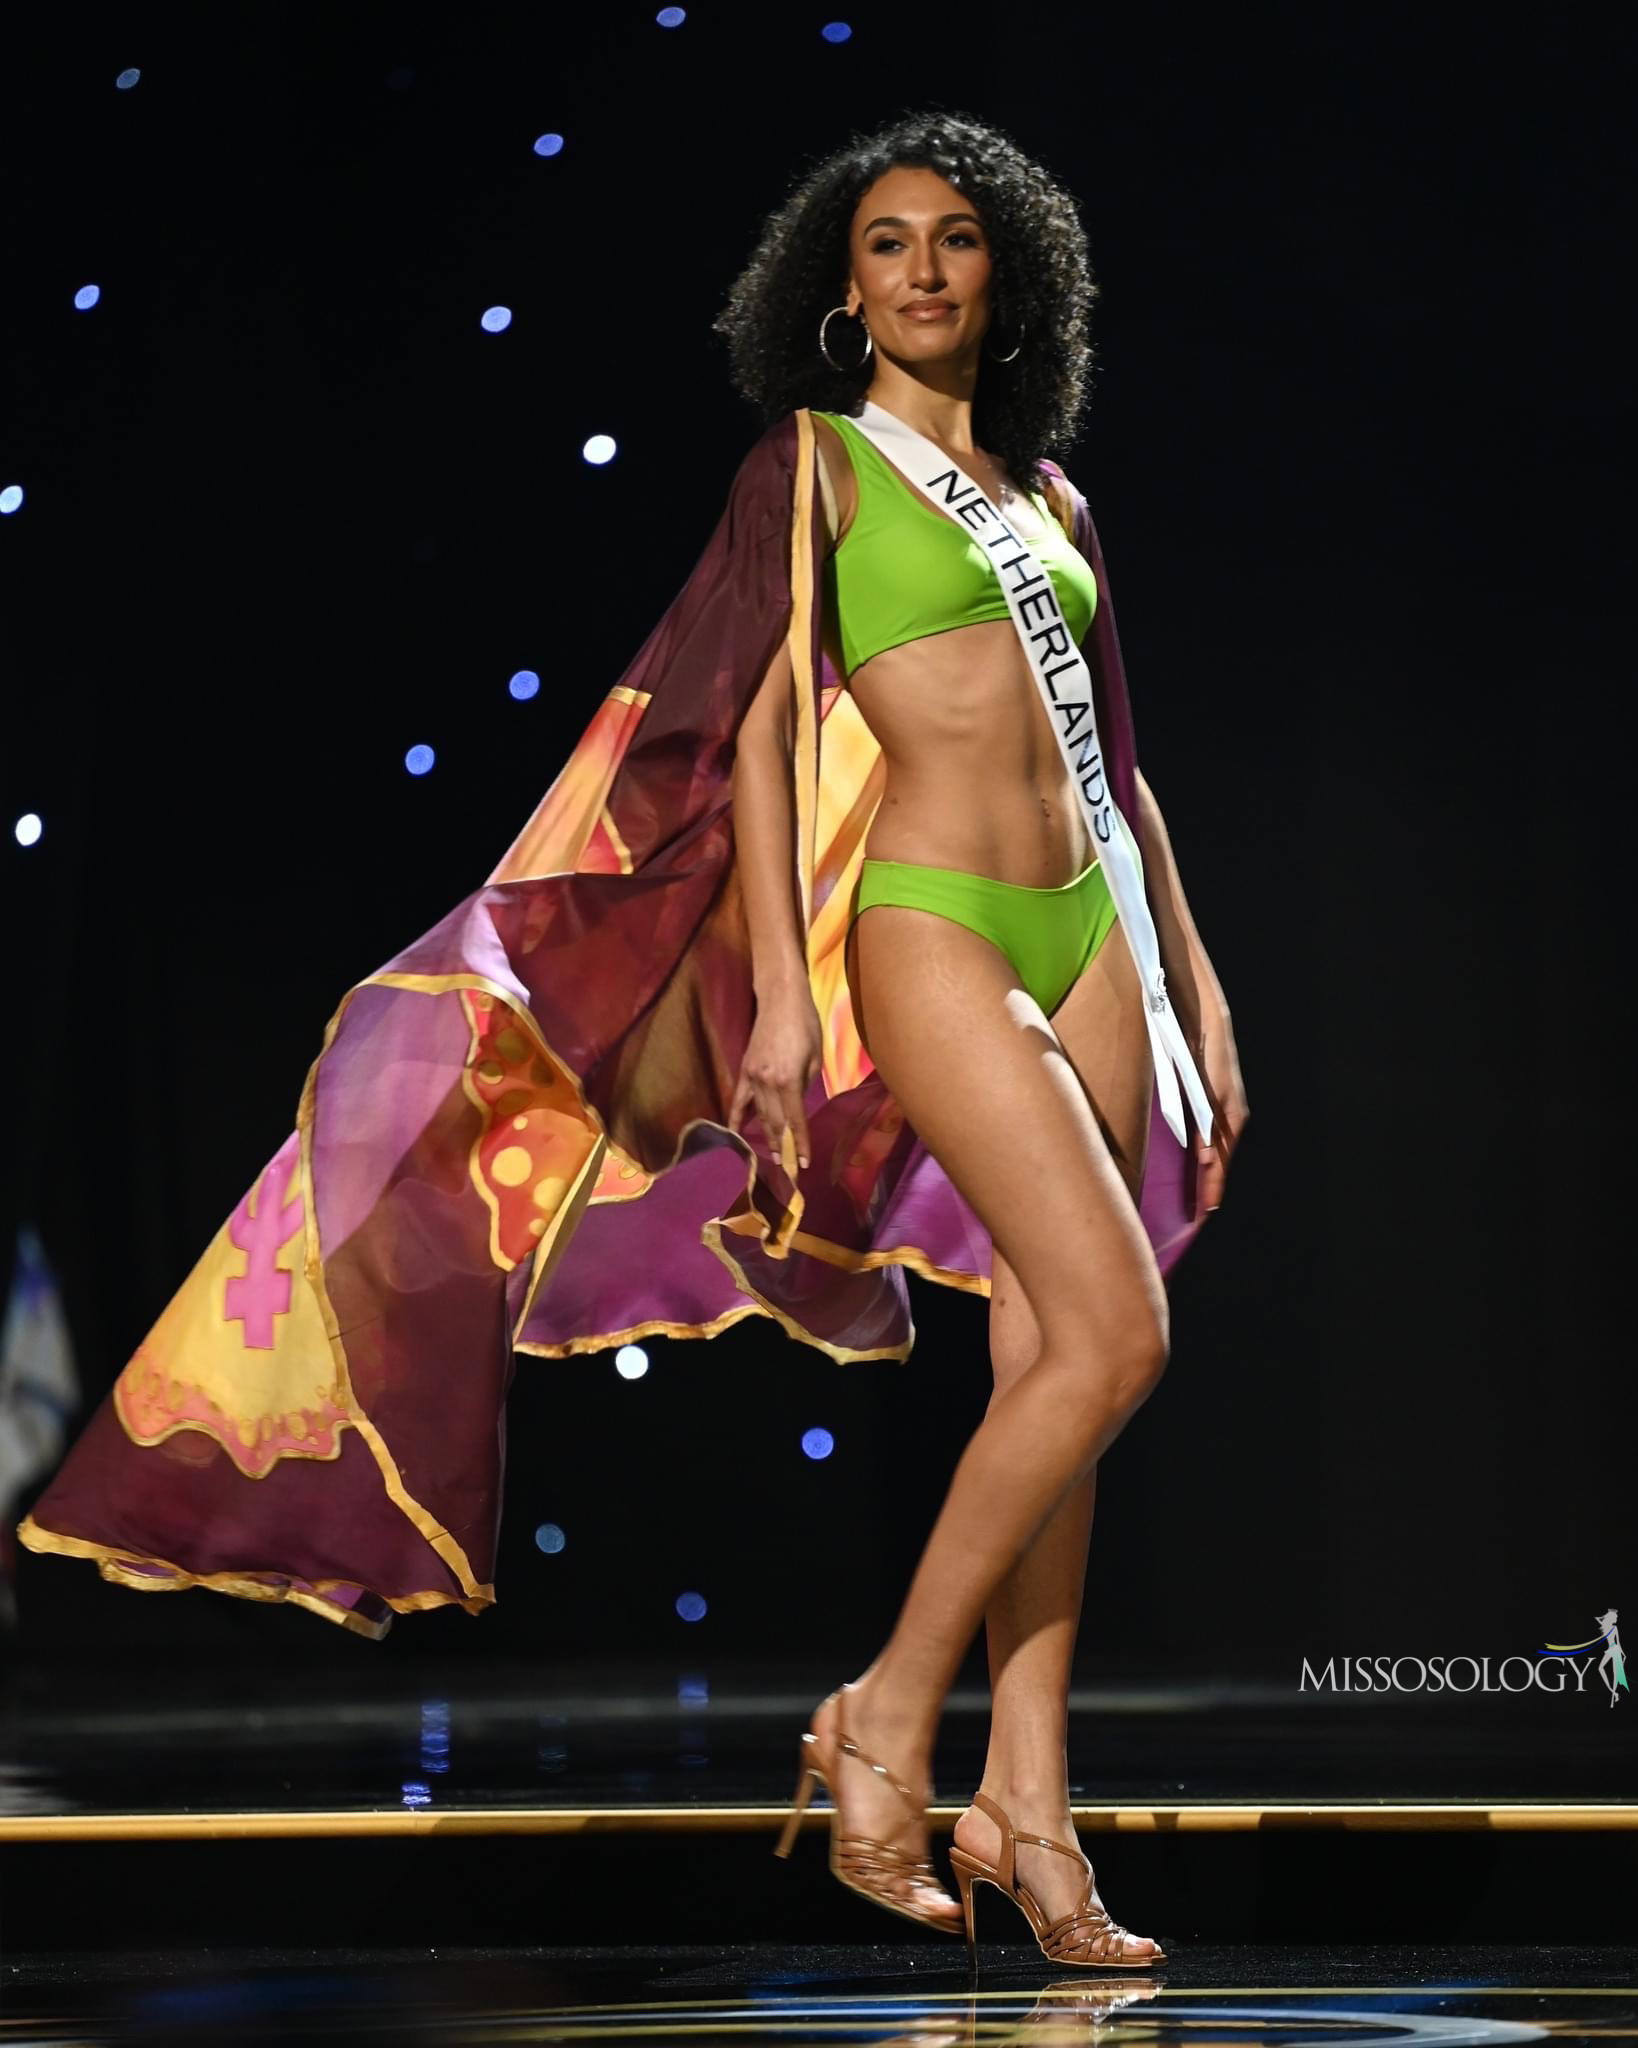 71st MISS UNIVERSE Preliminary Competition  - Página 5 HYA1Pte